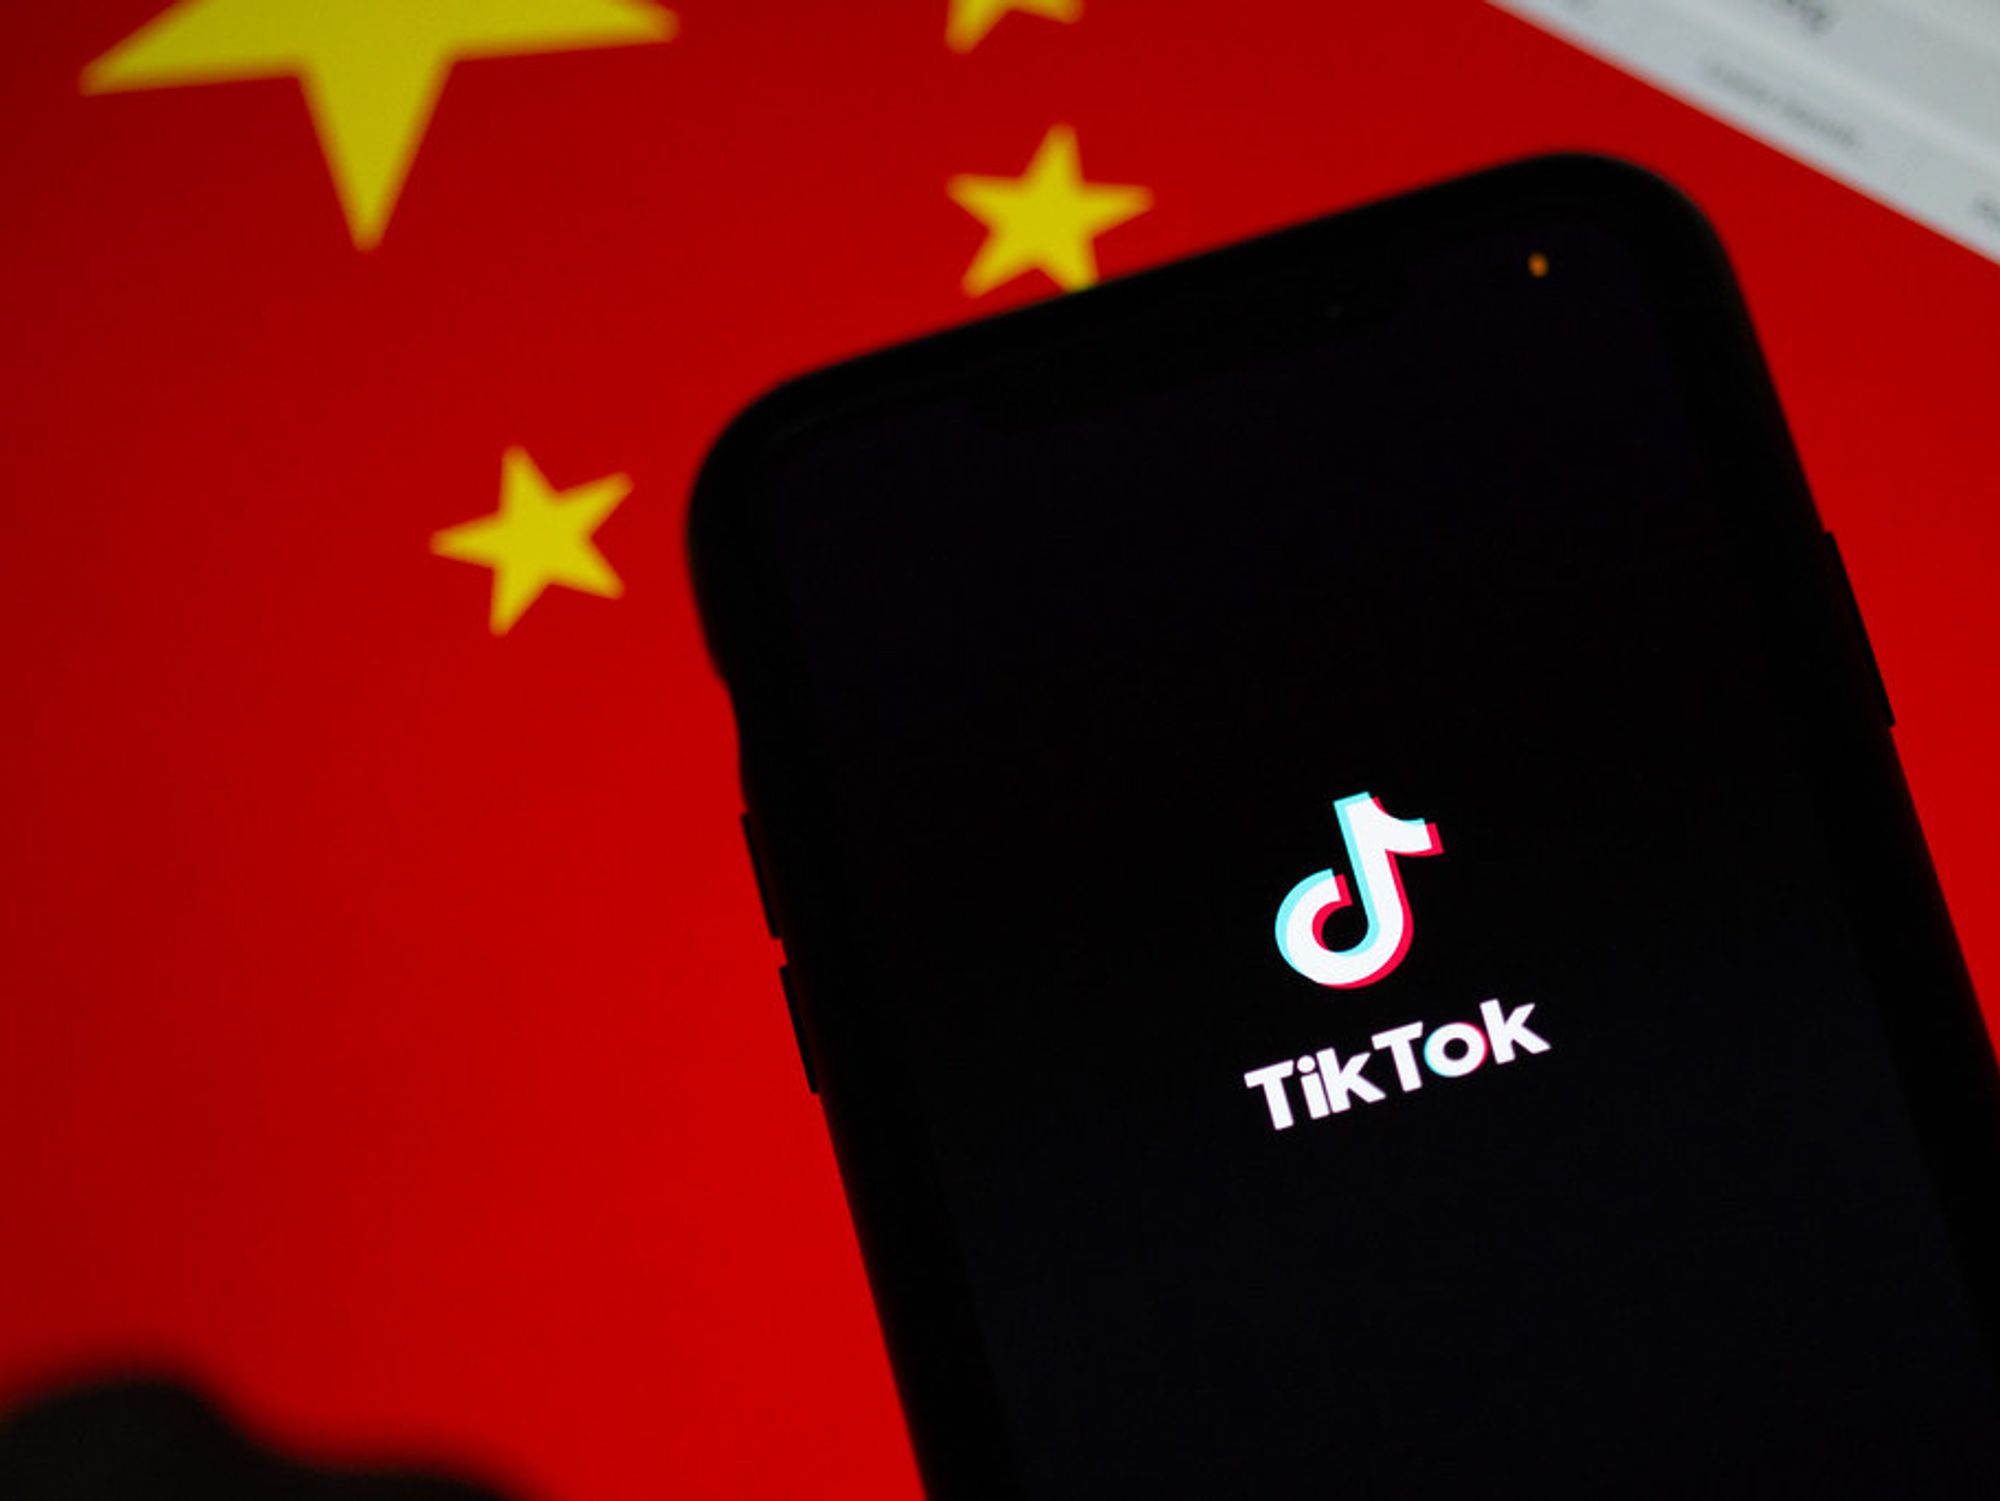 Justice Dept. Calls TikTok 'Direct Threat' to Privacy and Security of US